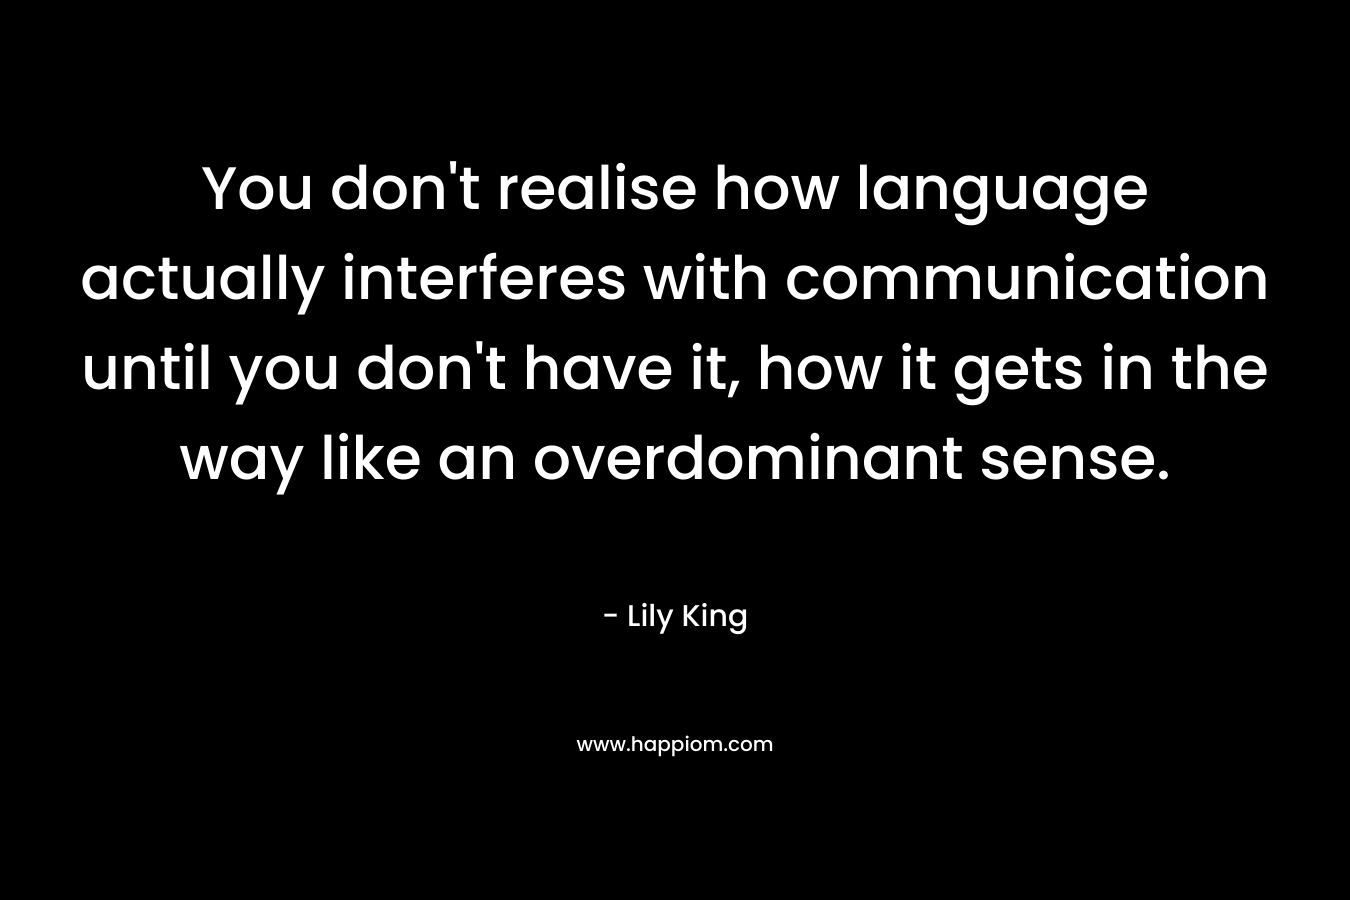 You don’t realise how language actually interferes with communication until you don’t have it, how it gets in the way like an overdominant sense. – Lily King